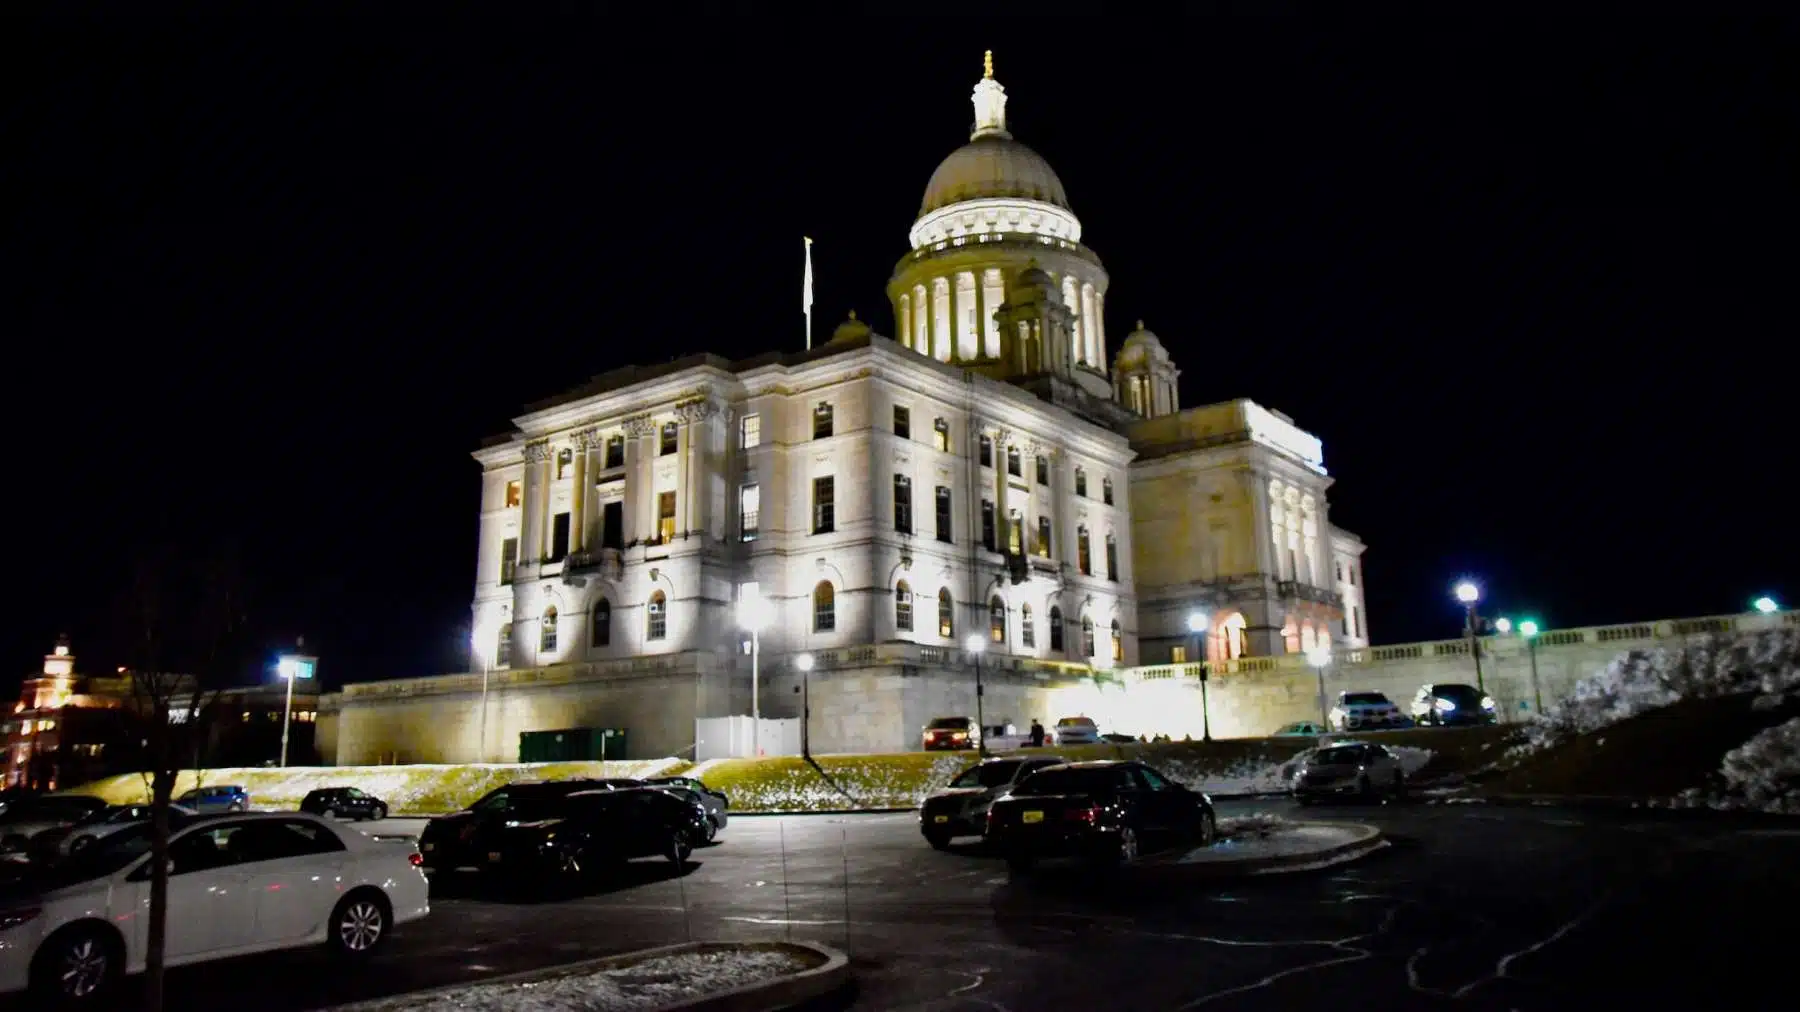 Rhode Island News: Lawmakers must act to stabilize Rhode Island’s economy